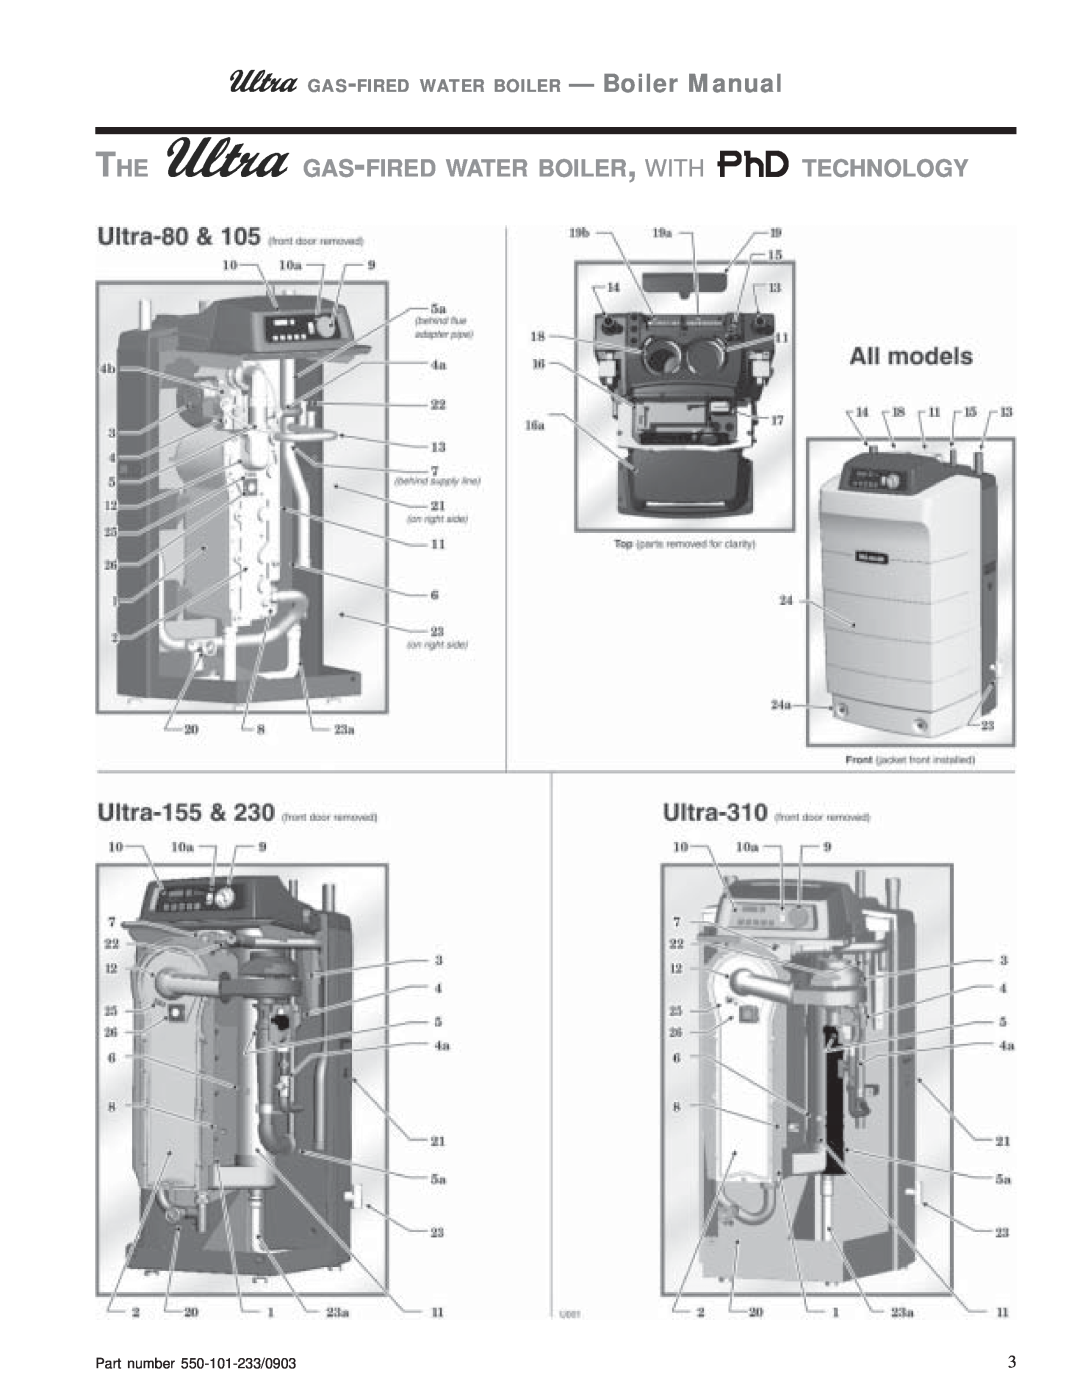 Weil-McLain 105, 80, 230, 310, 155 THE GAS-FIRED WATER BOILER, WITH PhD TECHNOLOGY, GAS-FIRED WATER BOILER - Boiler Manual 